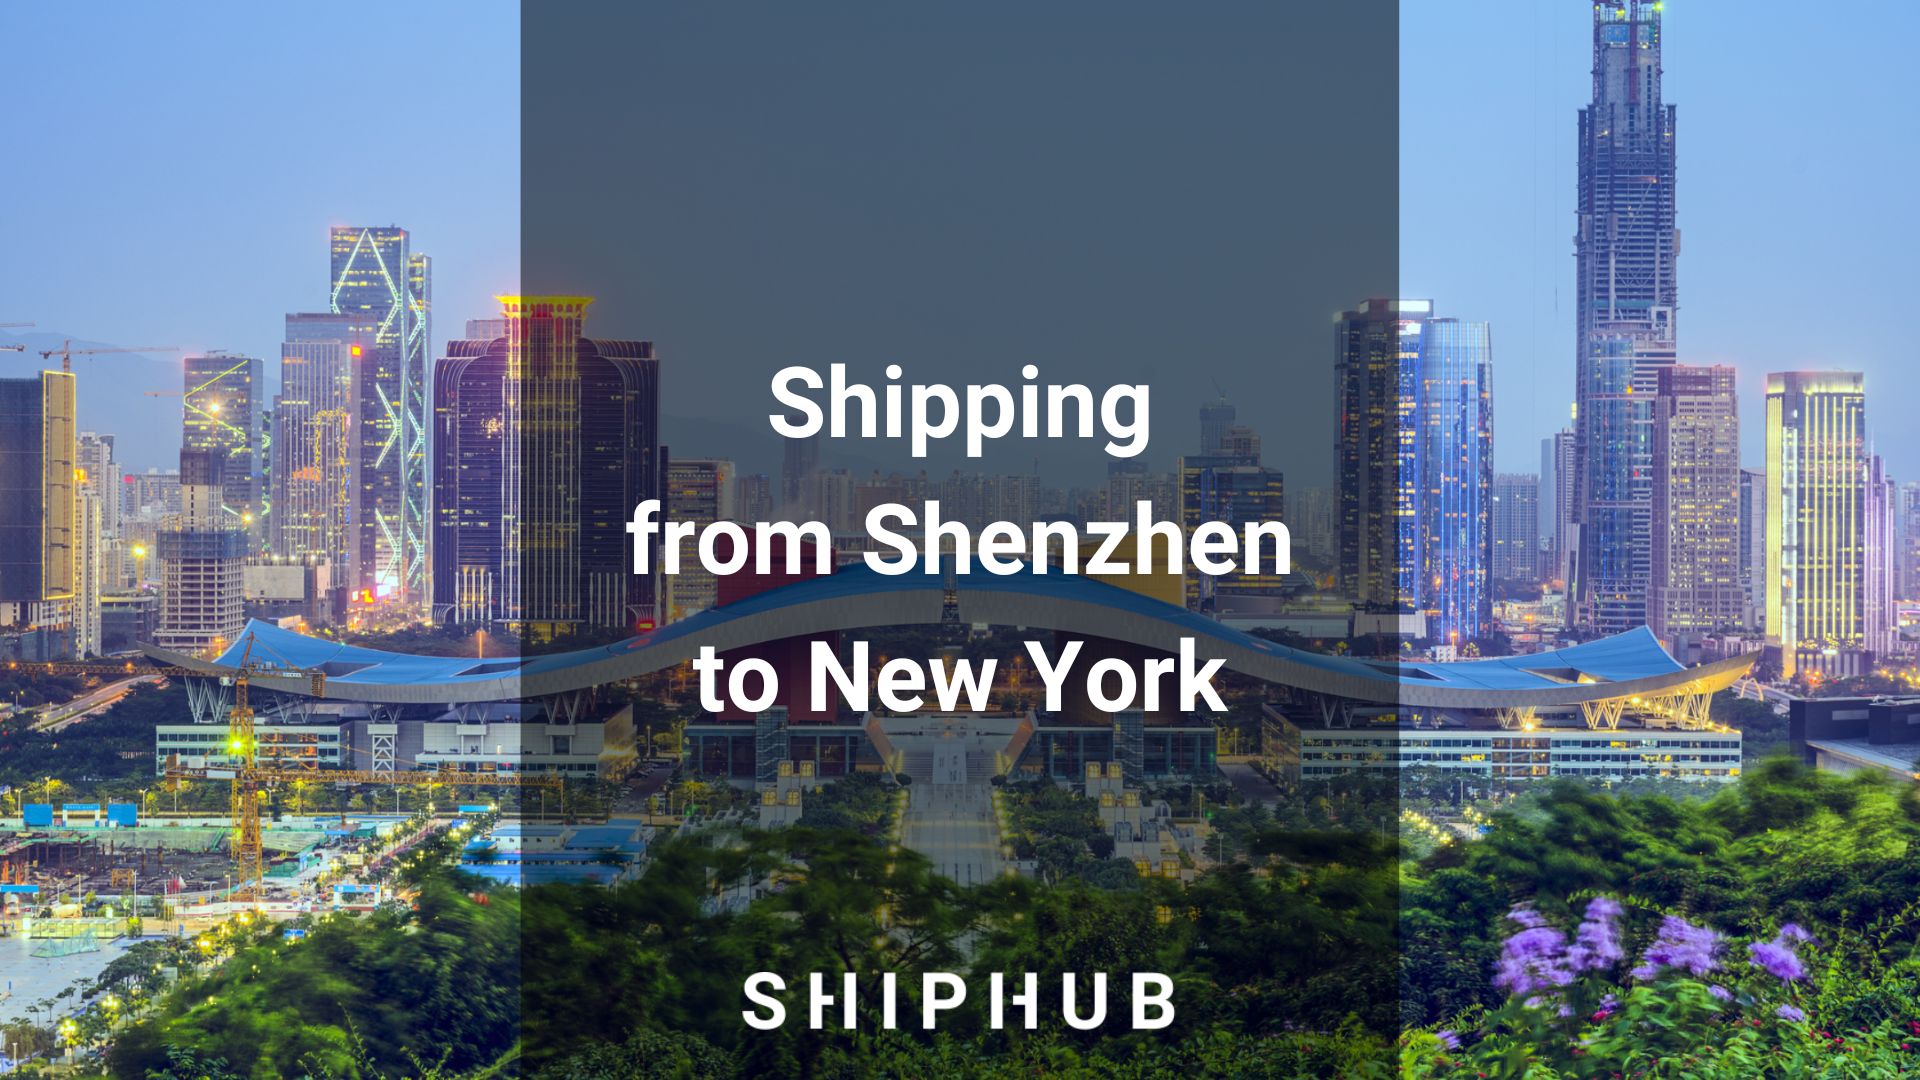 Shipping from Shenzhen to New York